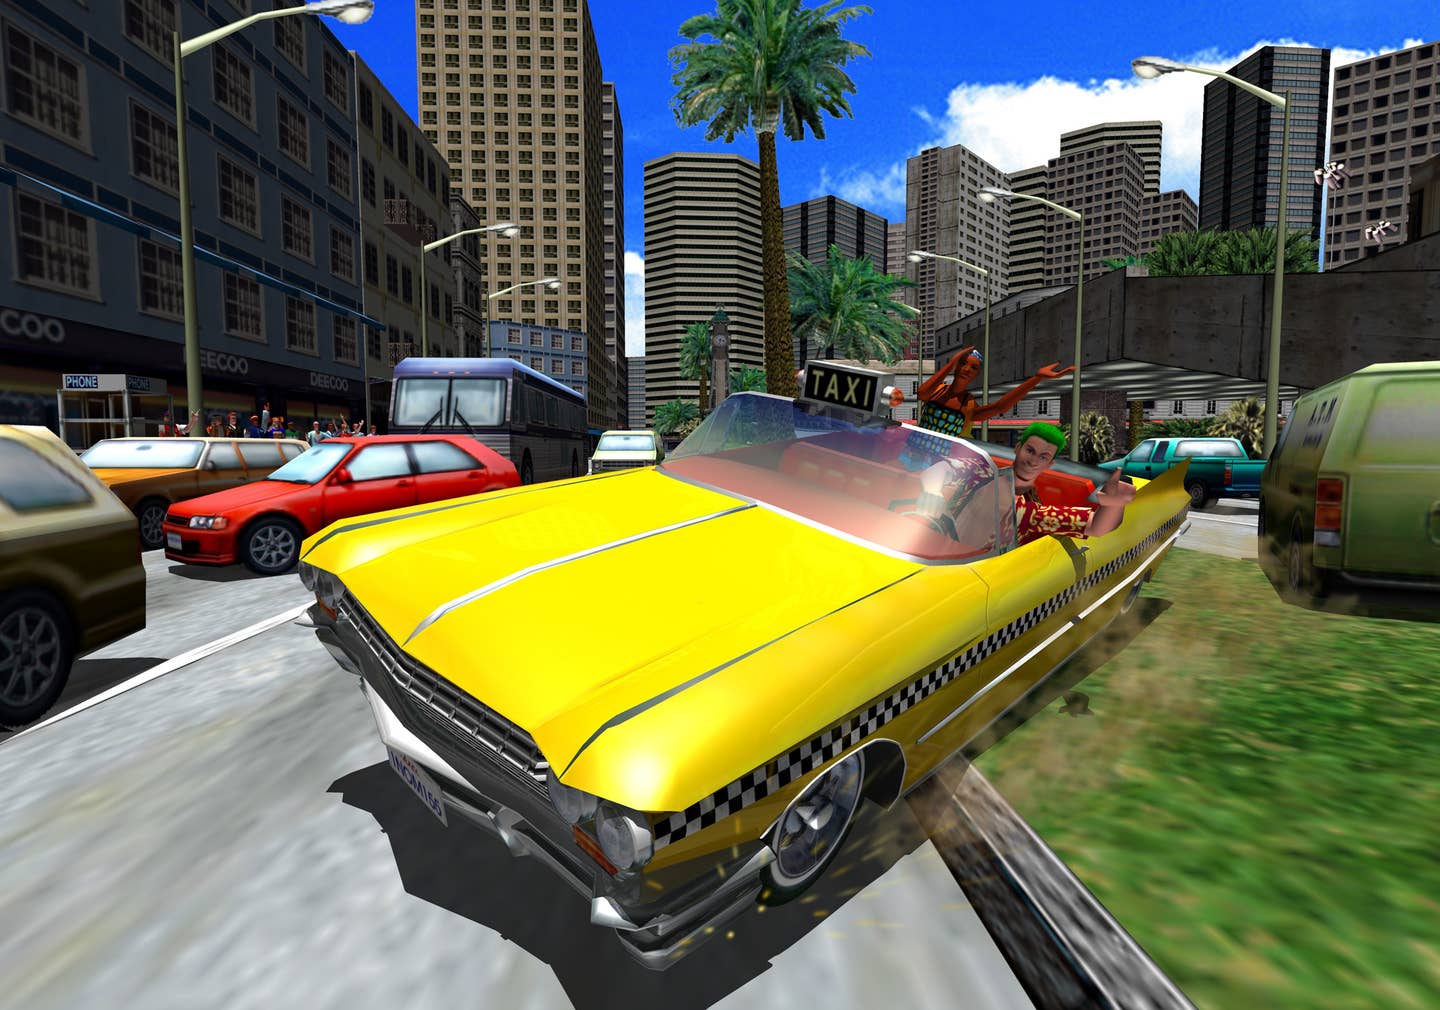 Key art for the original <em>Crazy Taxi</em>, which actually looked about this good on Dreamcast, albeit not quite so sharp.